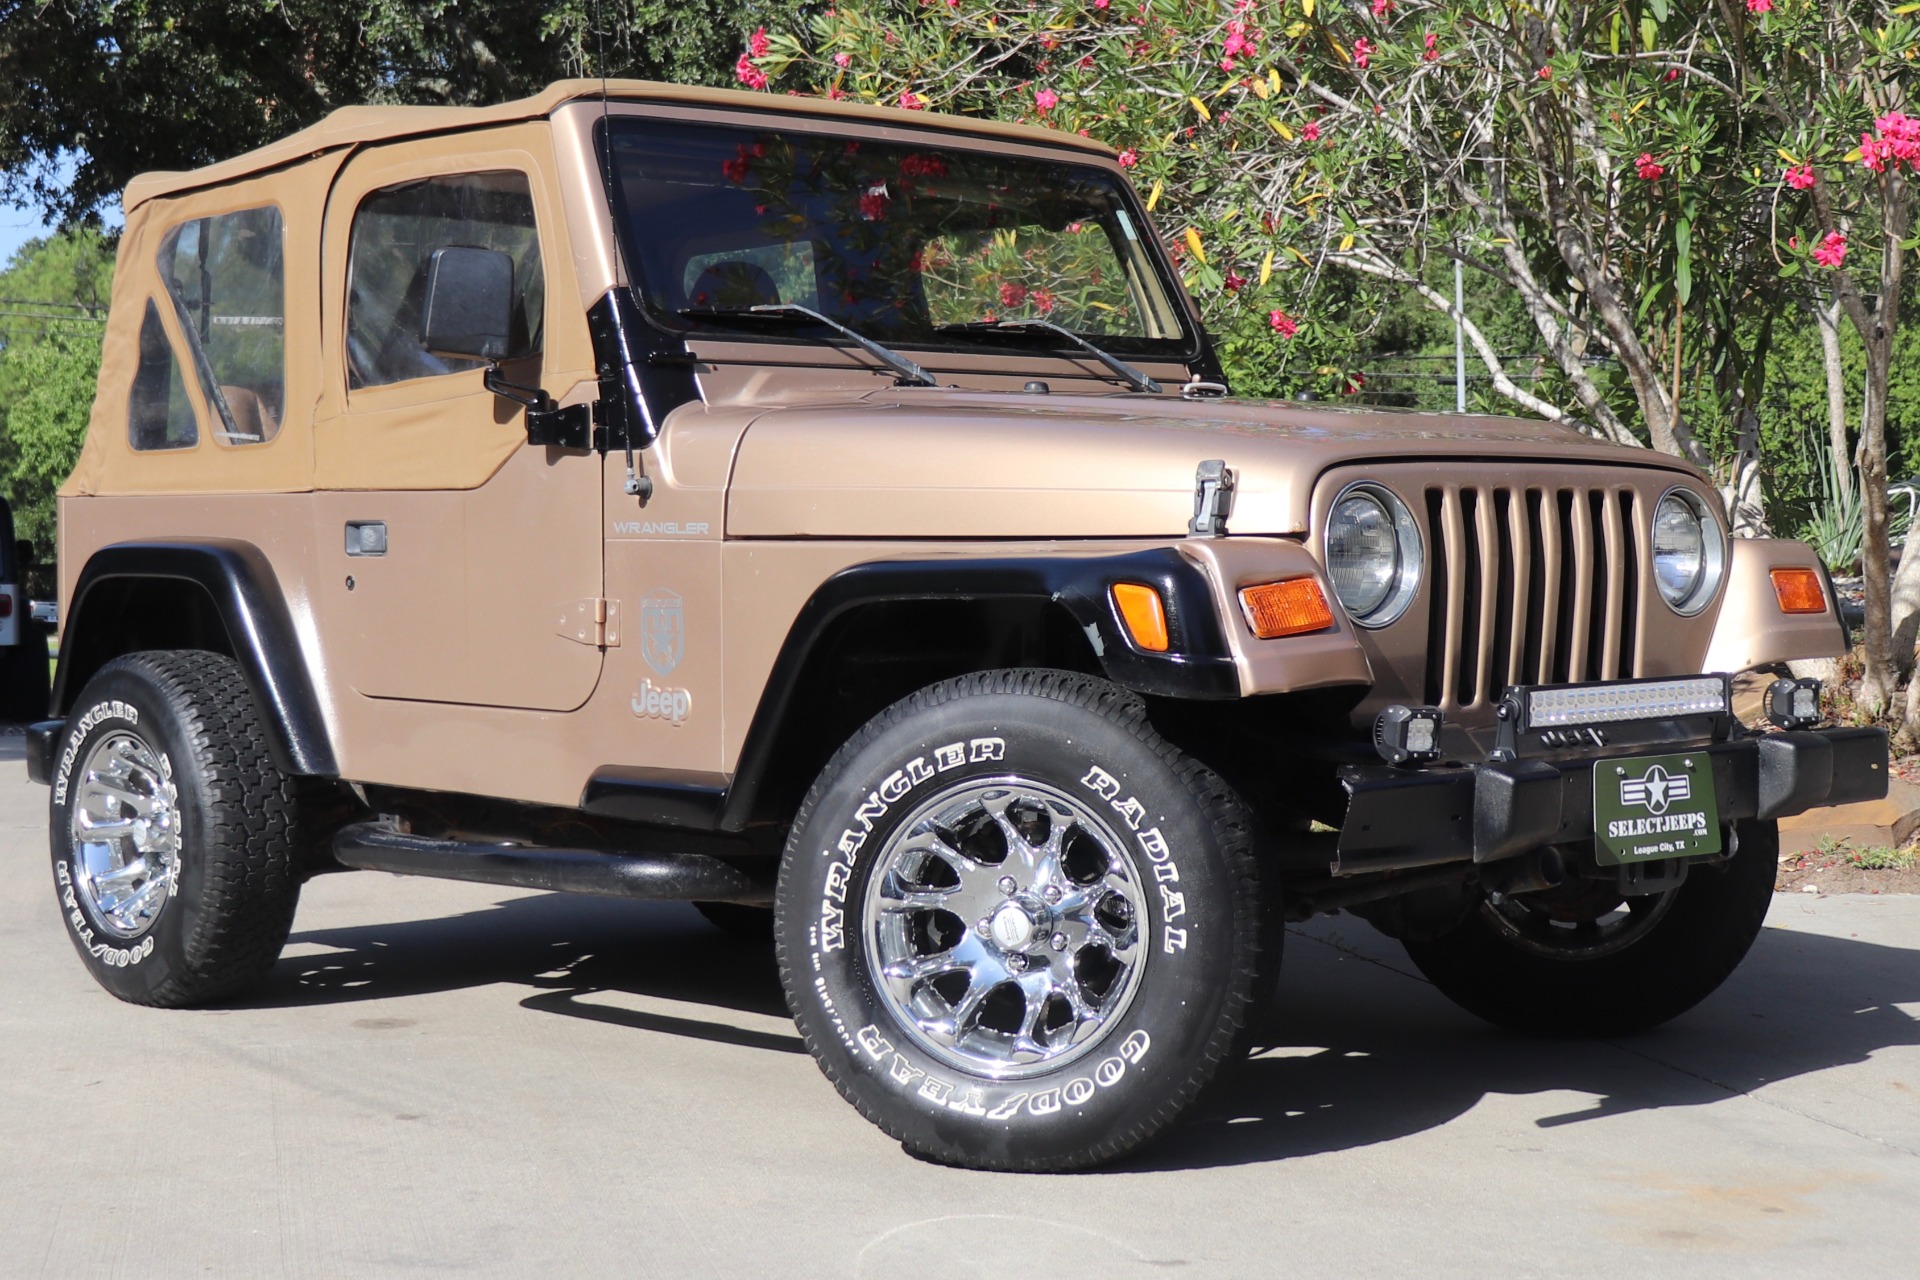 Used 1999 Jeep Wrangler SE For Sale ($6,995) | Select Jeeps Inc. Stock  #412144